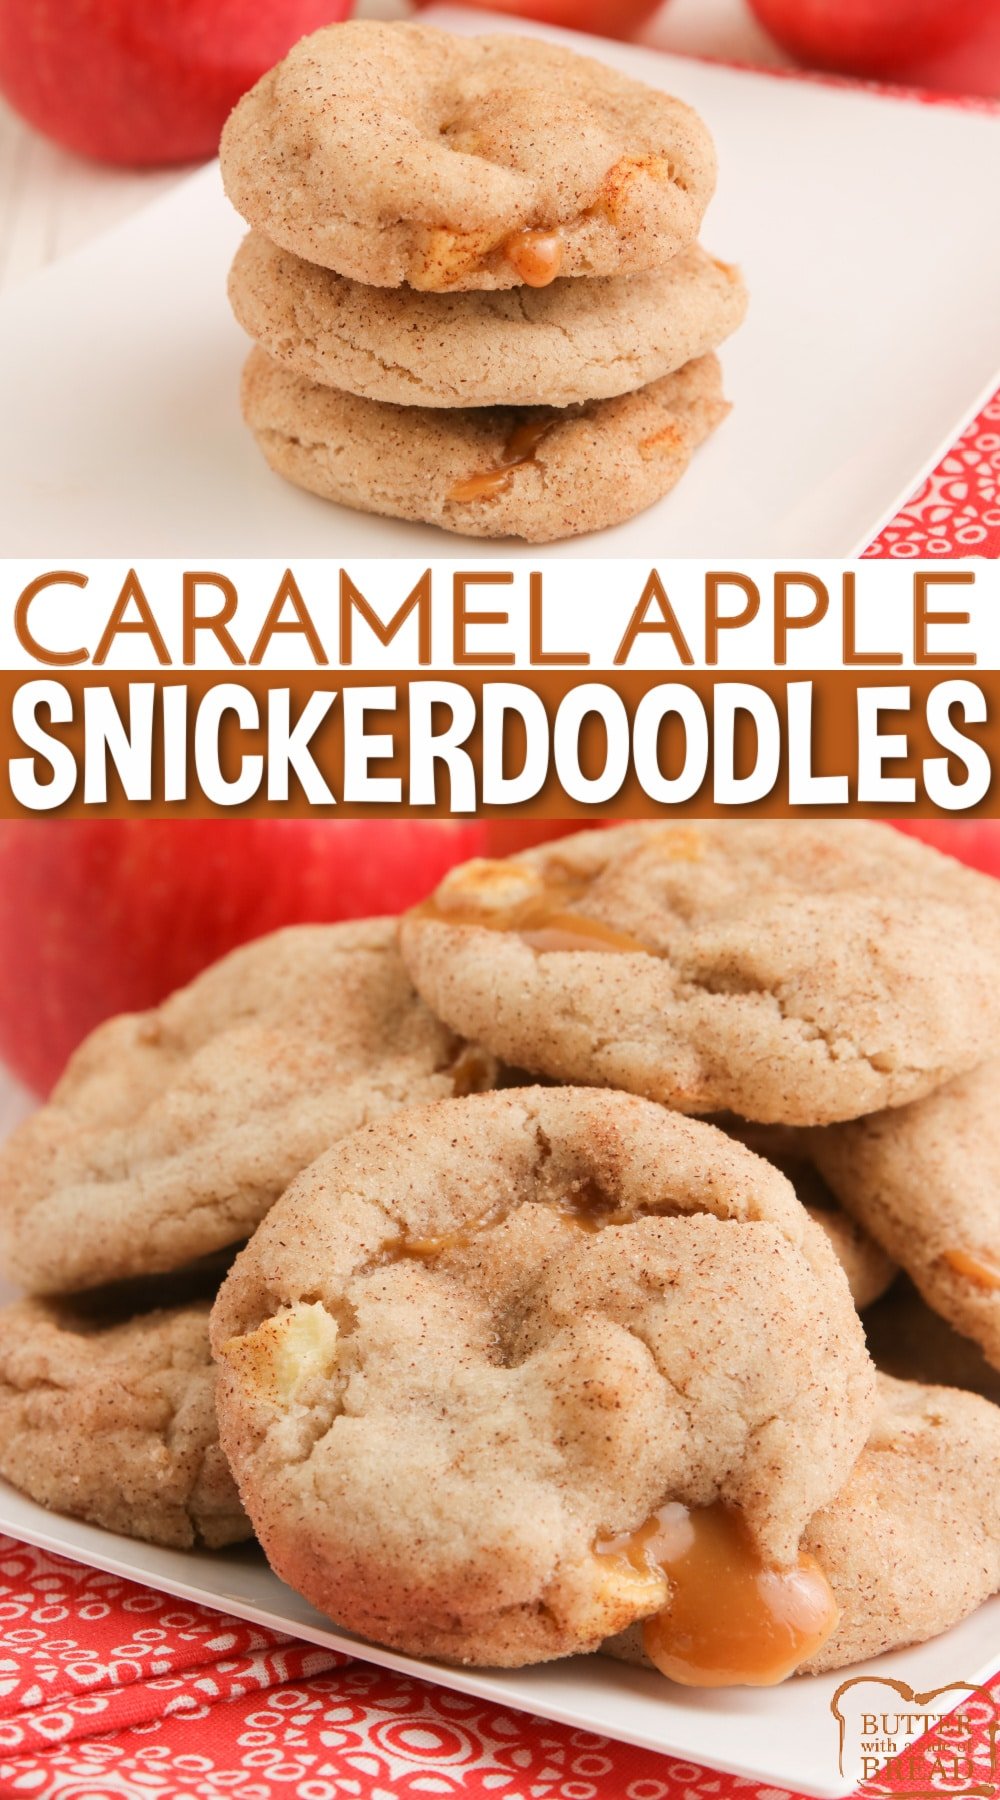 Caramel Apple Snickerdoodles combine the taste of your favorite cinnamon sugar cookie with the deliciousness of chewy caramel and fresh apples too! Soft, chewy and absolutely delicious! 